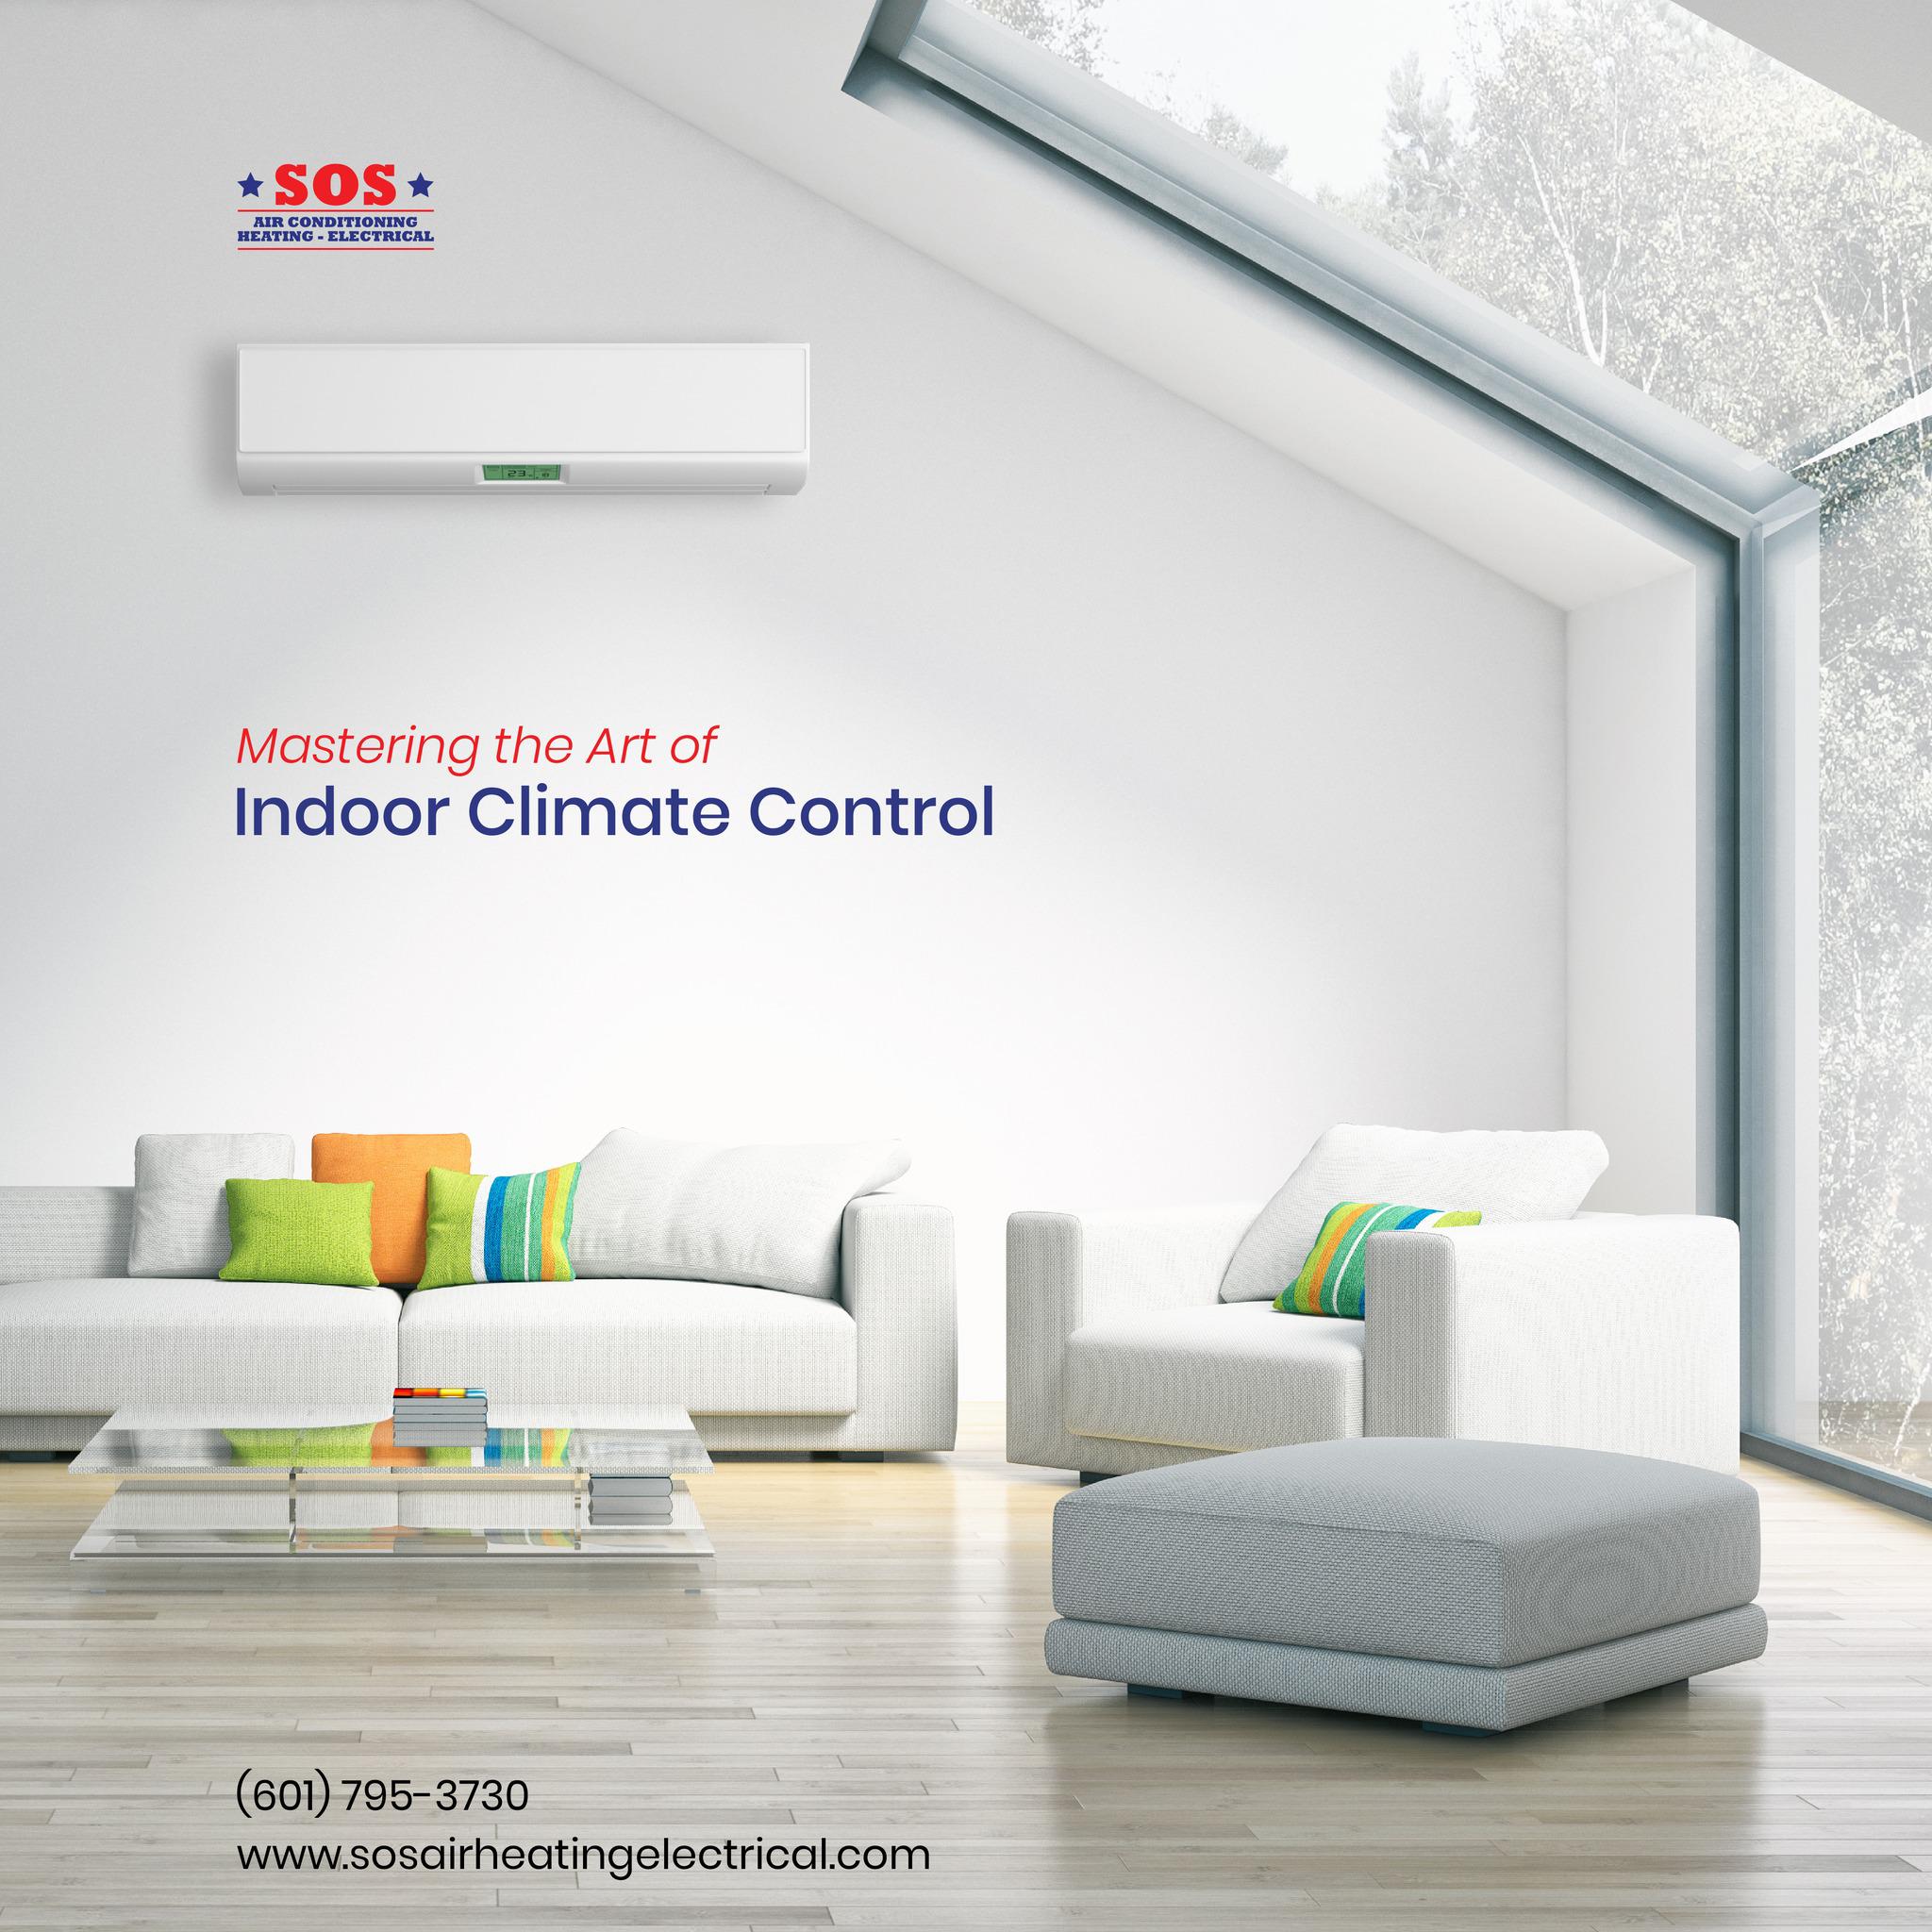 Image 6 | SOS Air Conditioning, Heating & Electrical